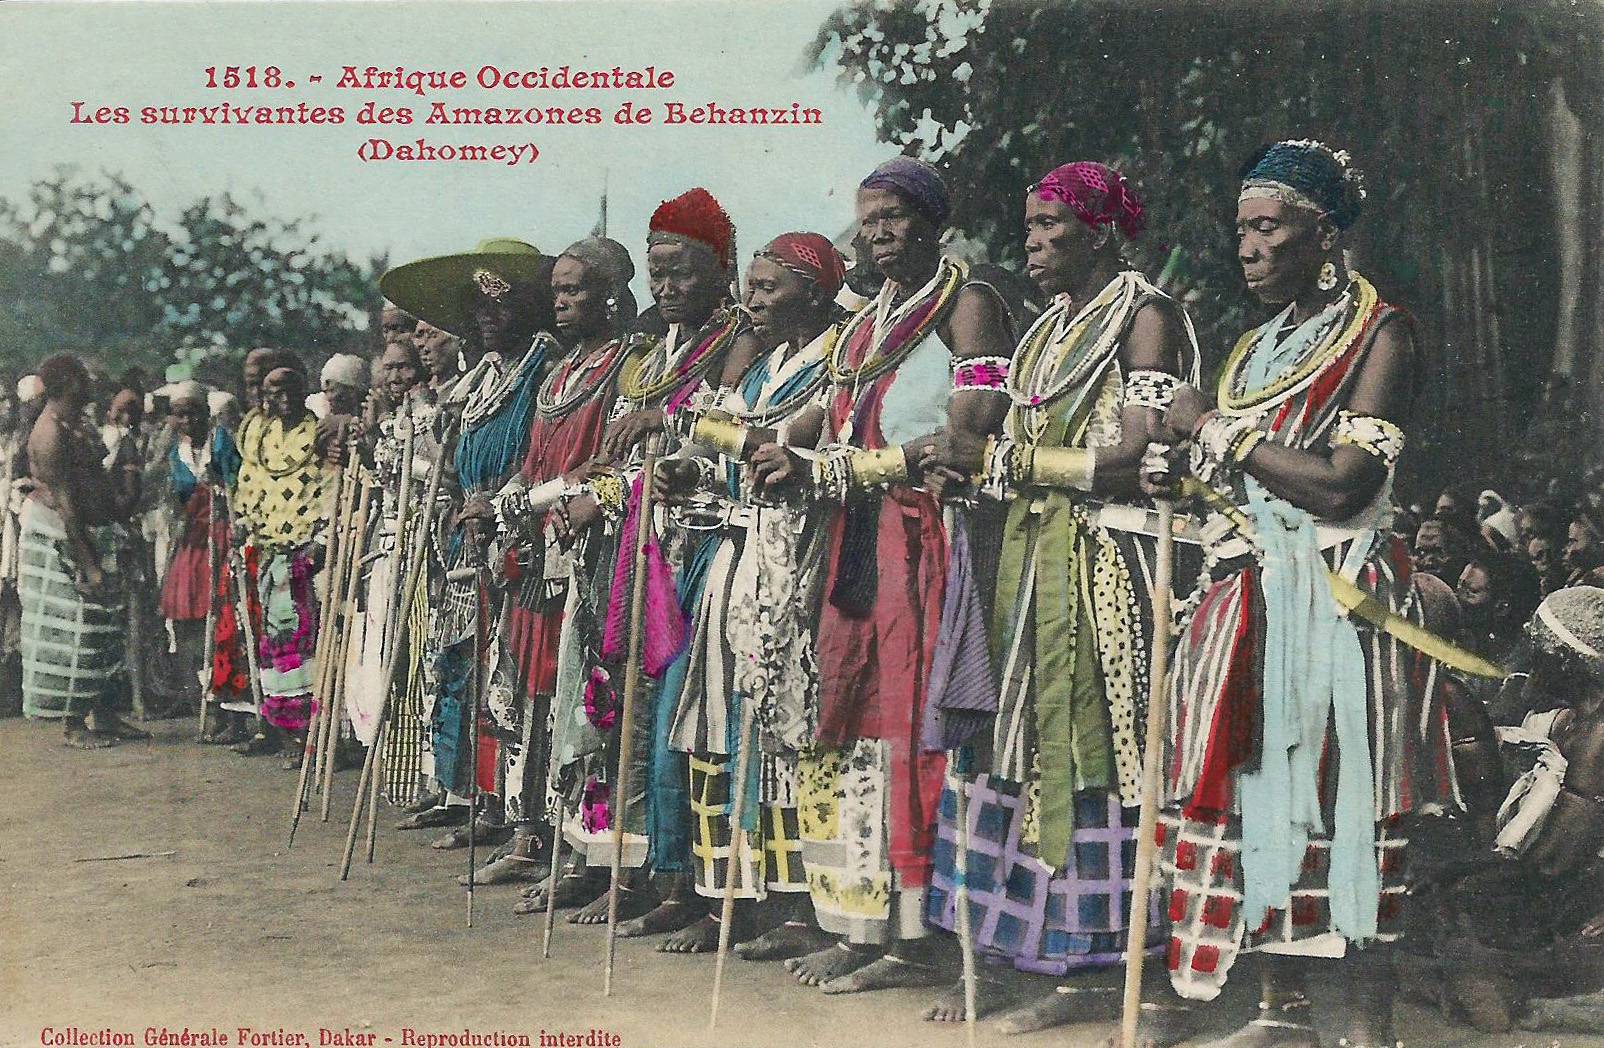 Archival image of an African tribe